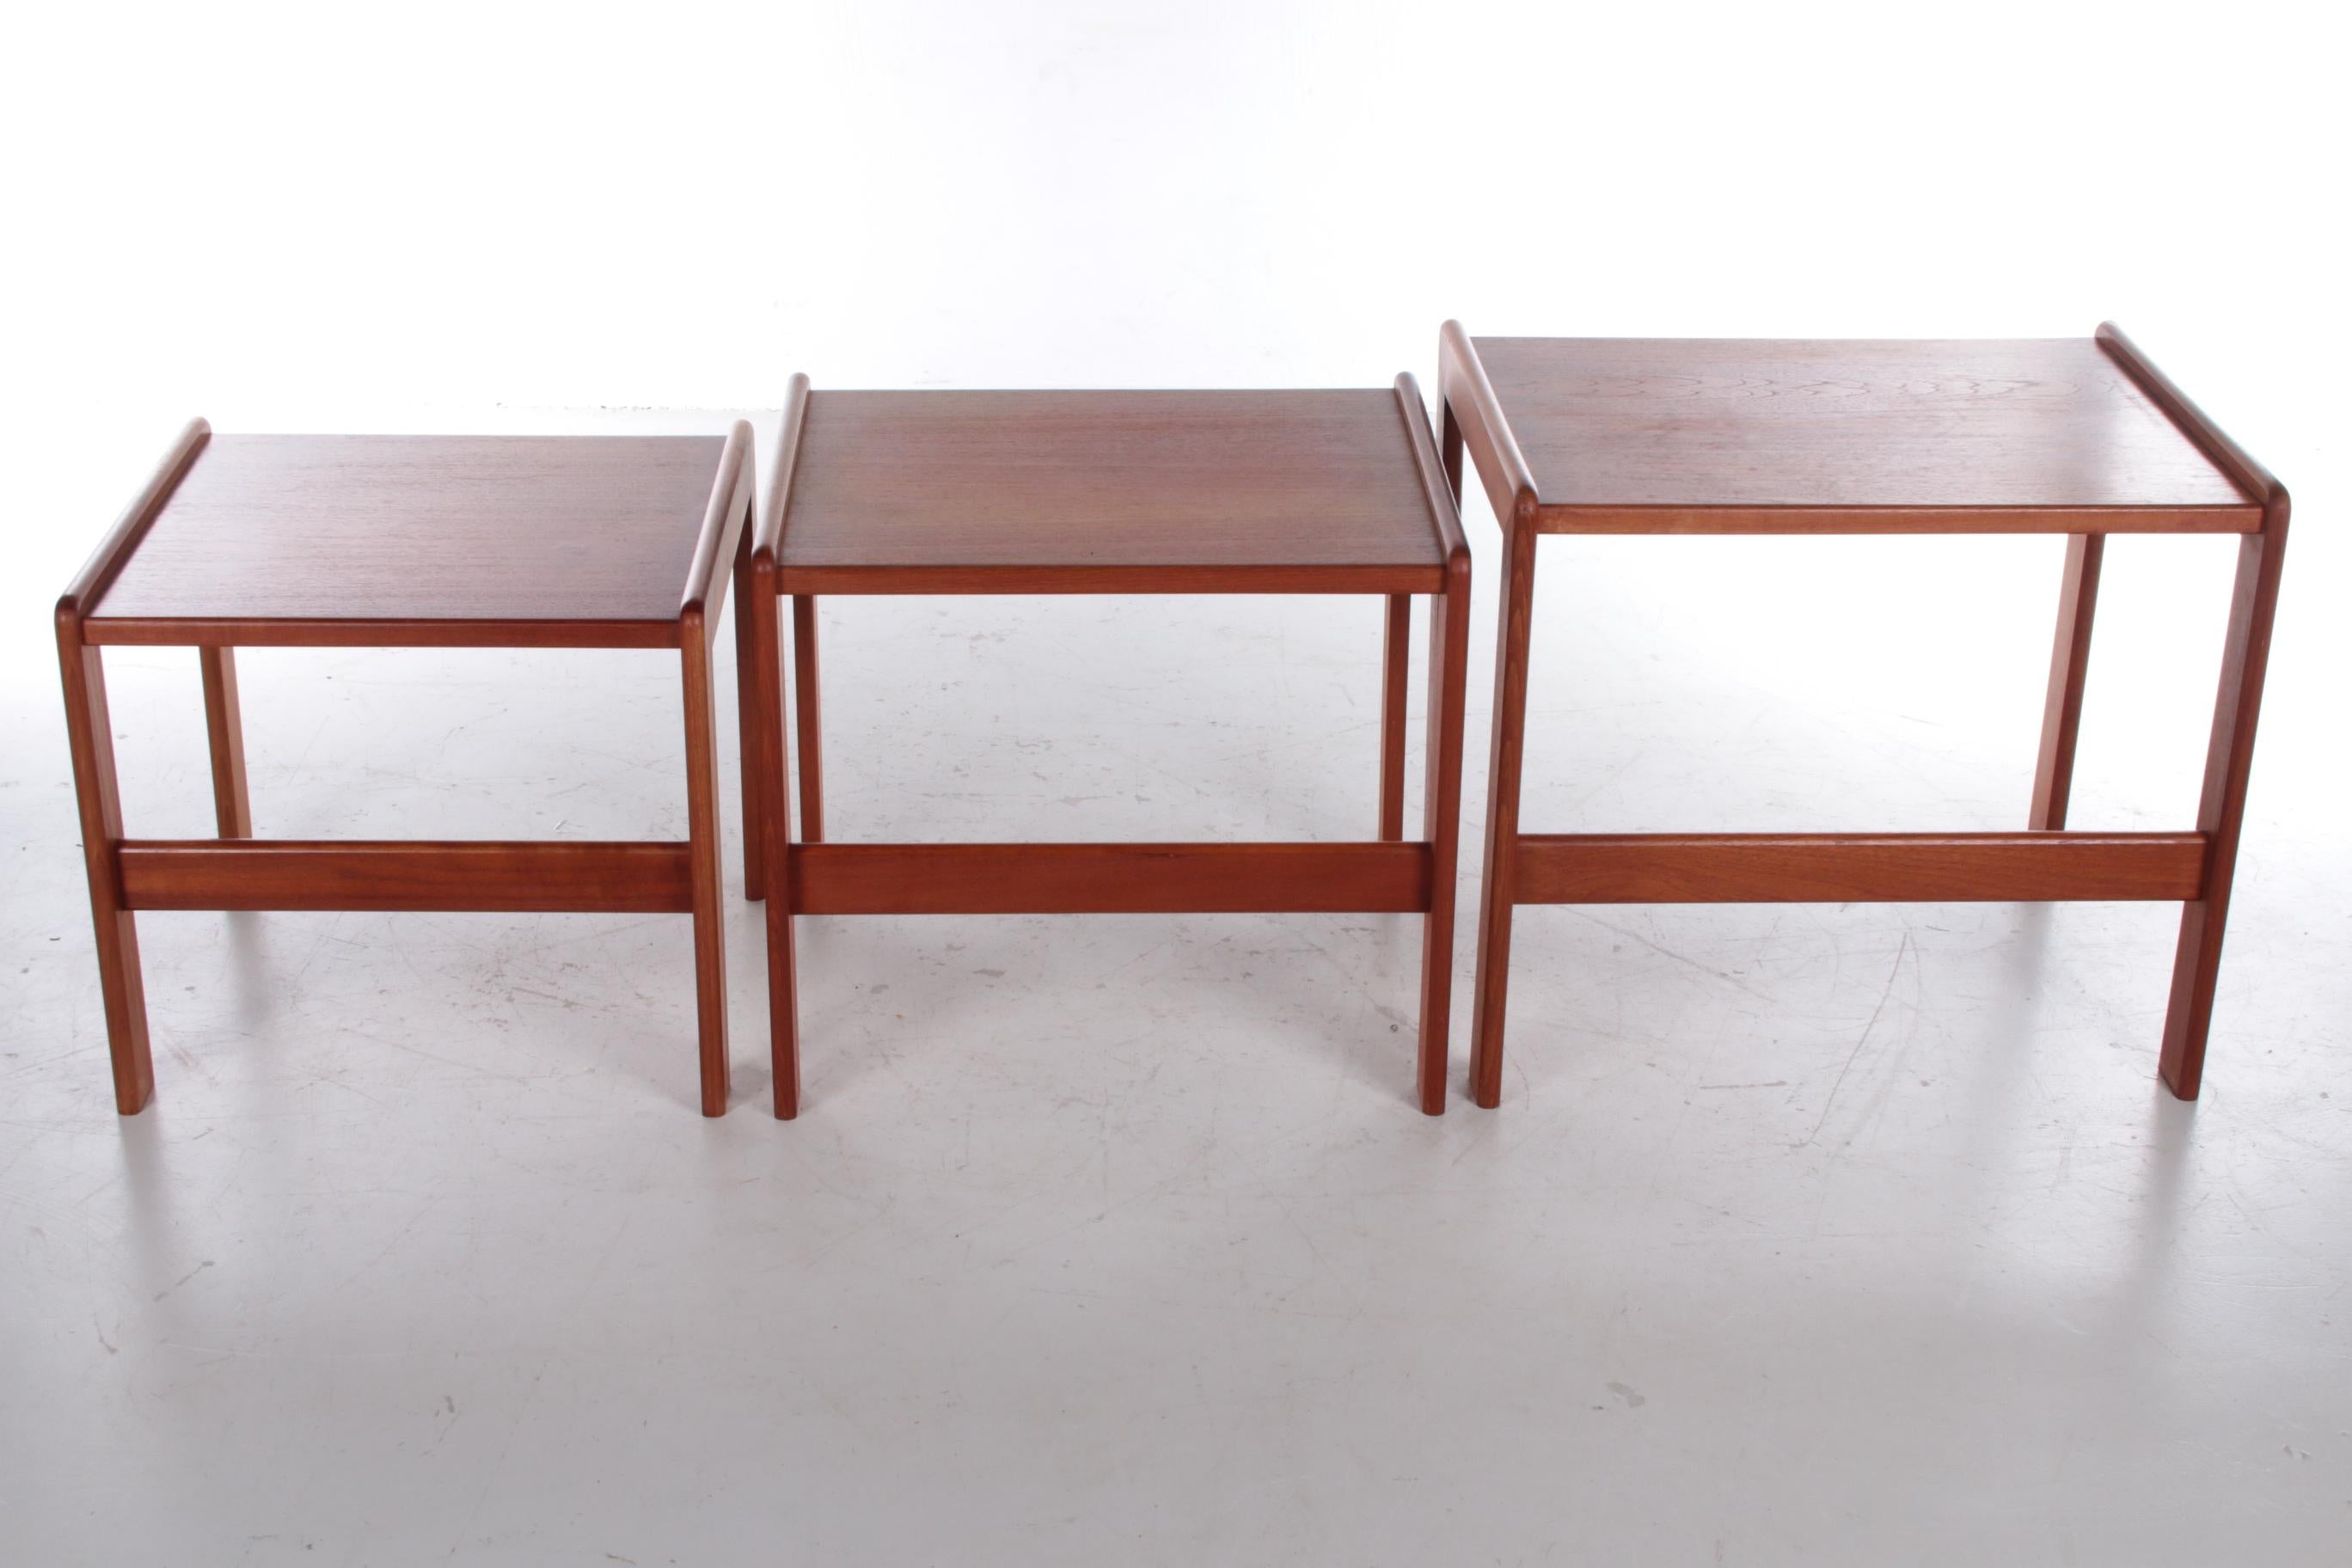 Mid-20th Century Vintage Set of Side Tables Made of Teak Made in the 1960s For Sale